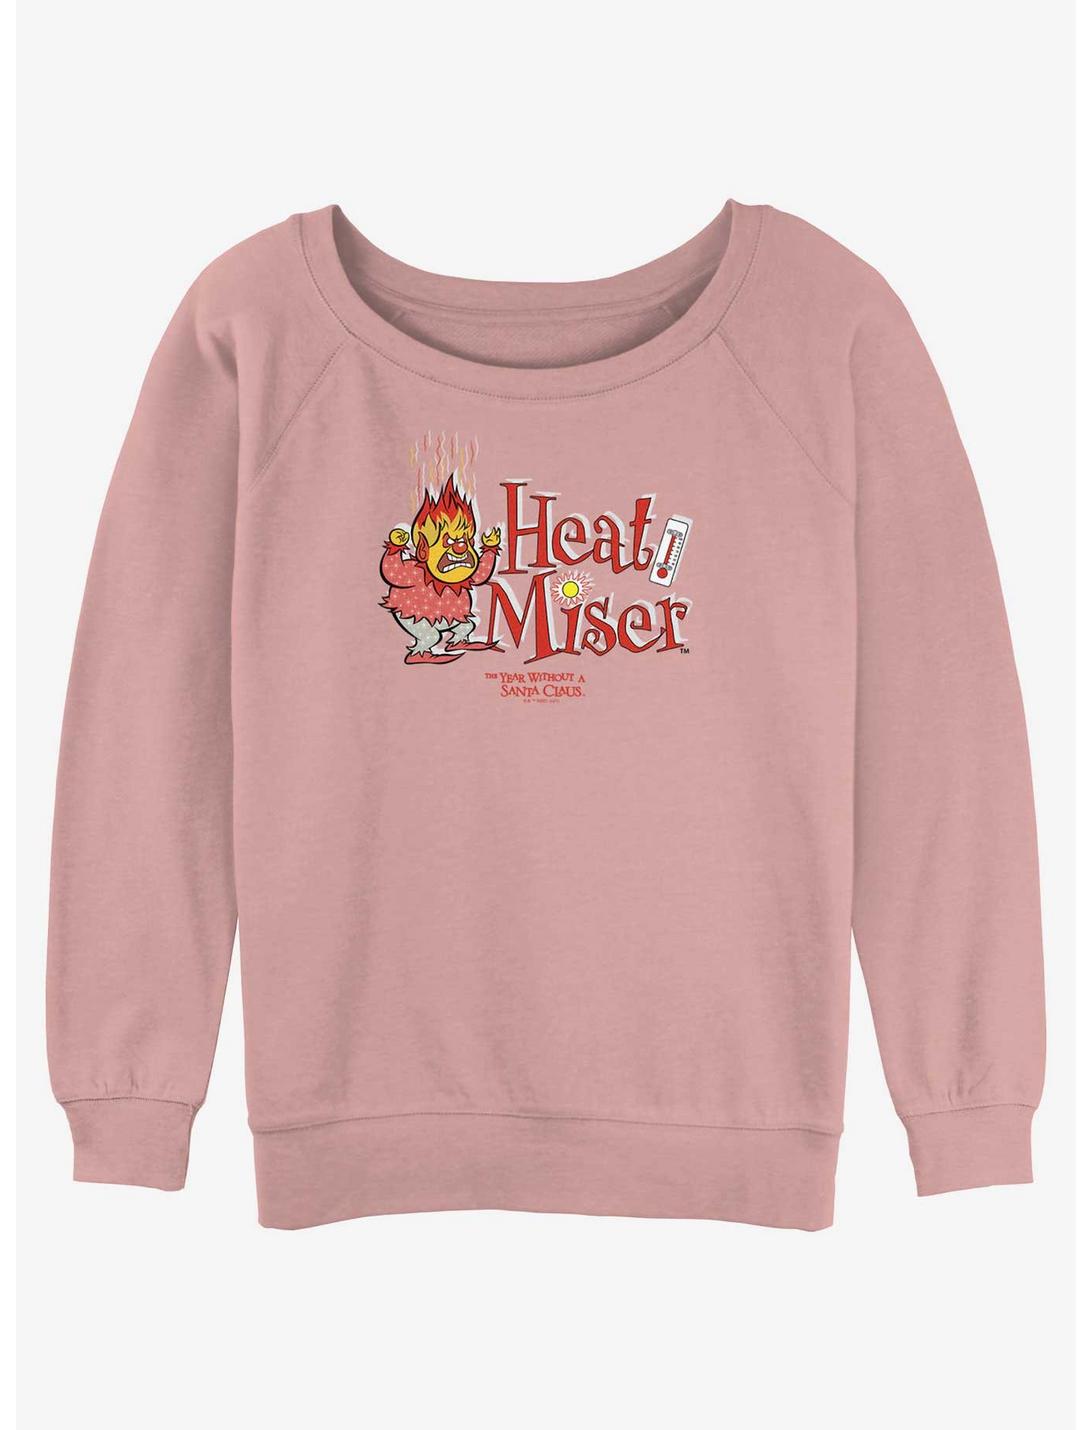 The Year Without a Santa Claus Heat Miser Badge Womens Slouchy Sweatshirt, DESERTPNK, hi-res